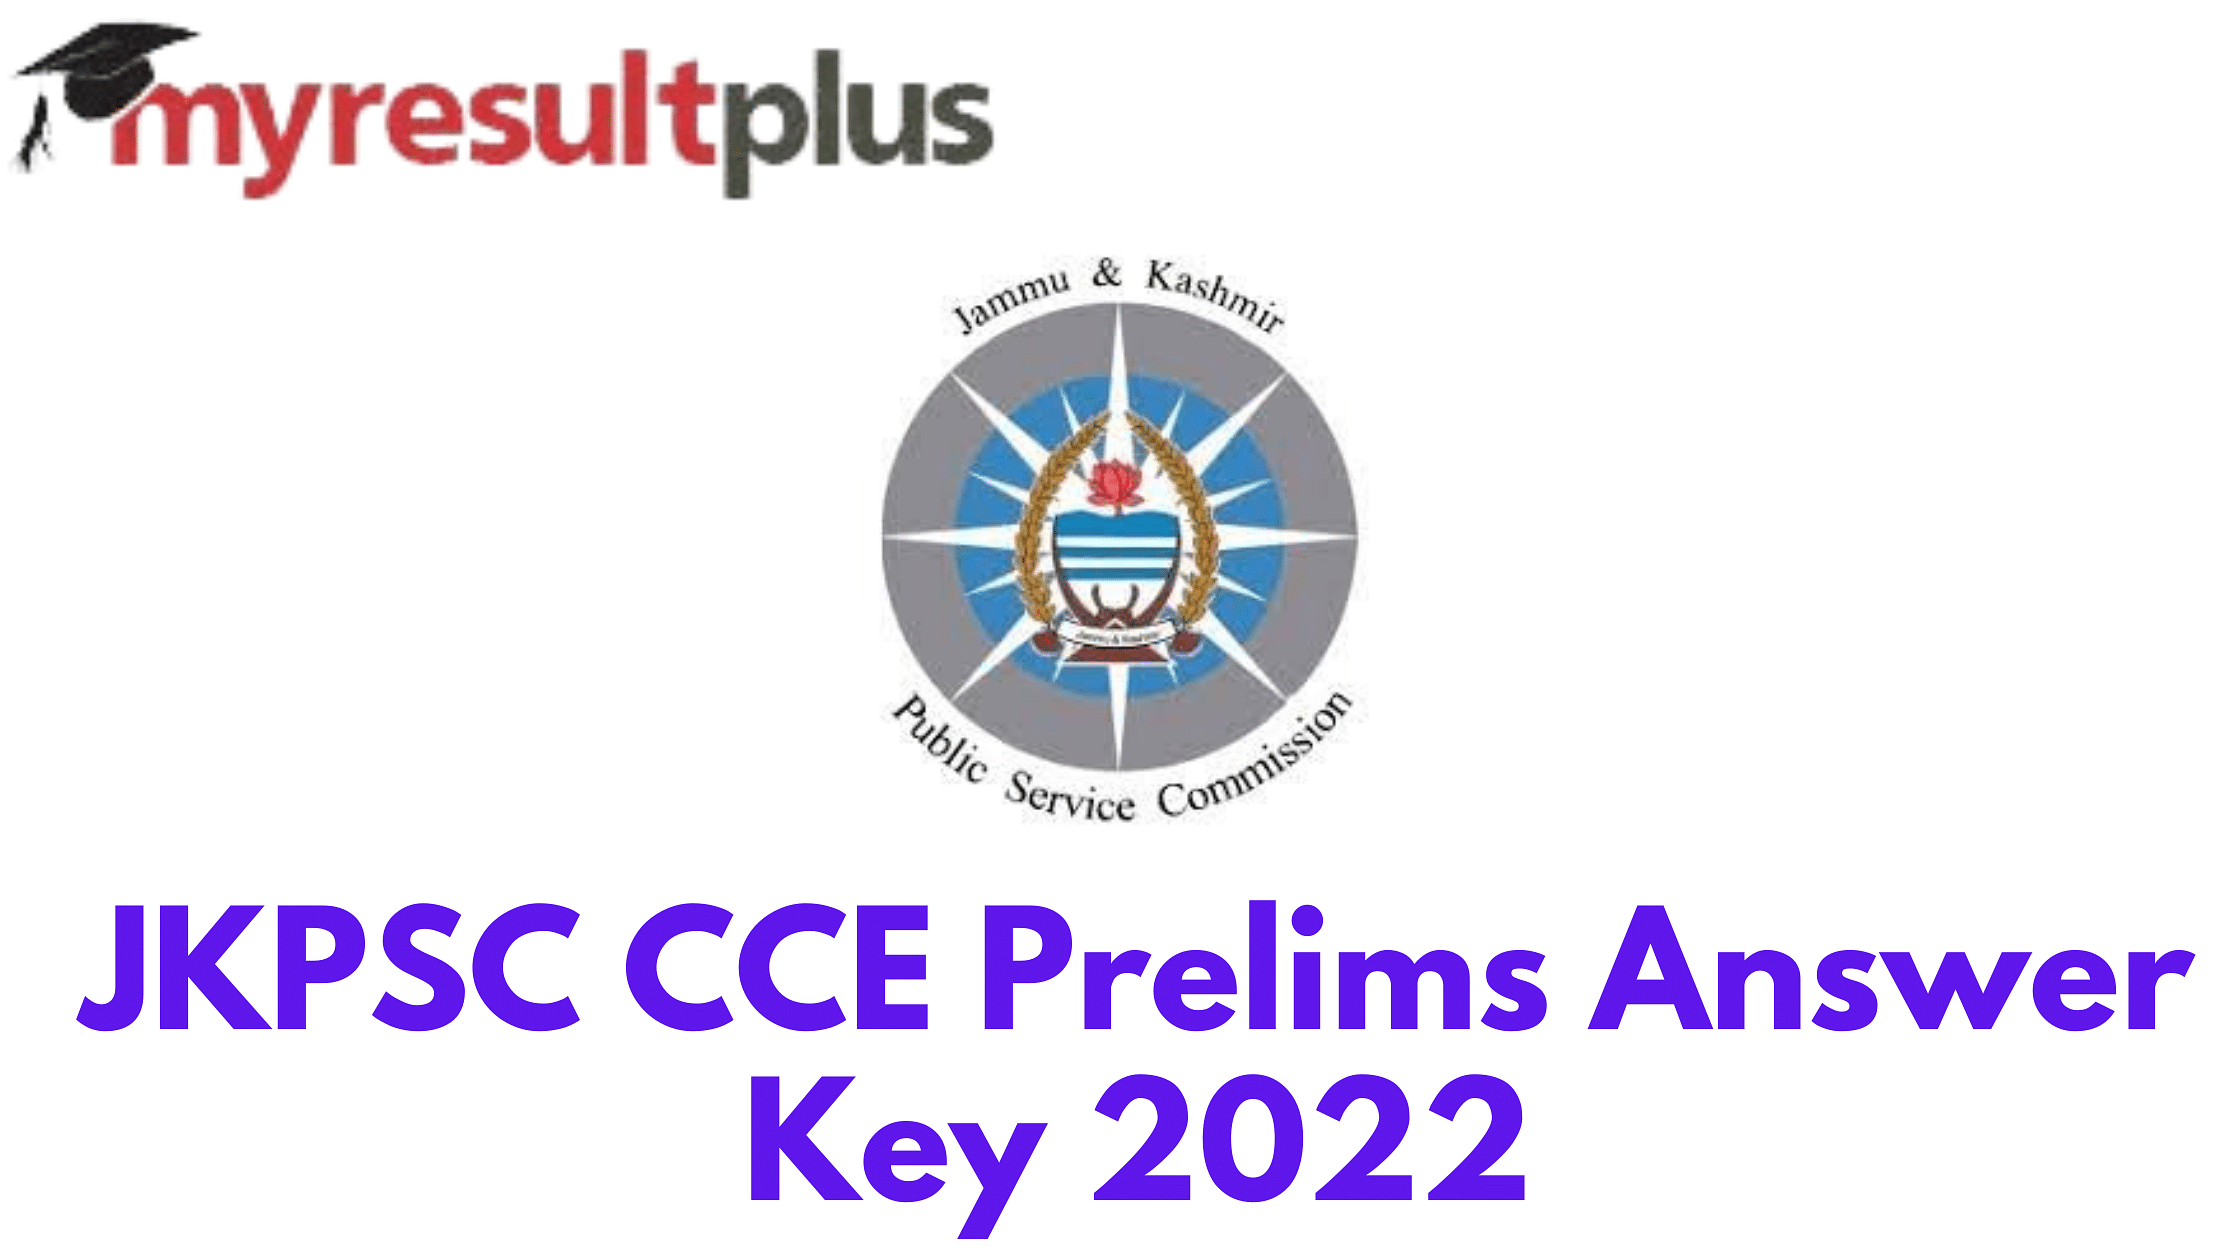 JKPSC CCE 2022: Prelims Answer Key Available for Download, Direct Link Here